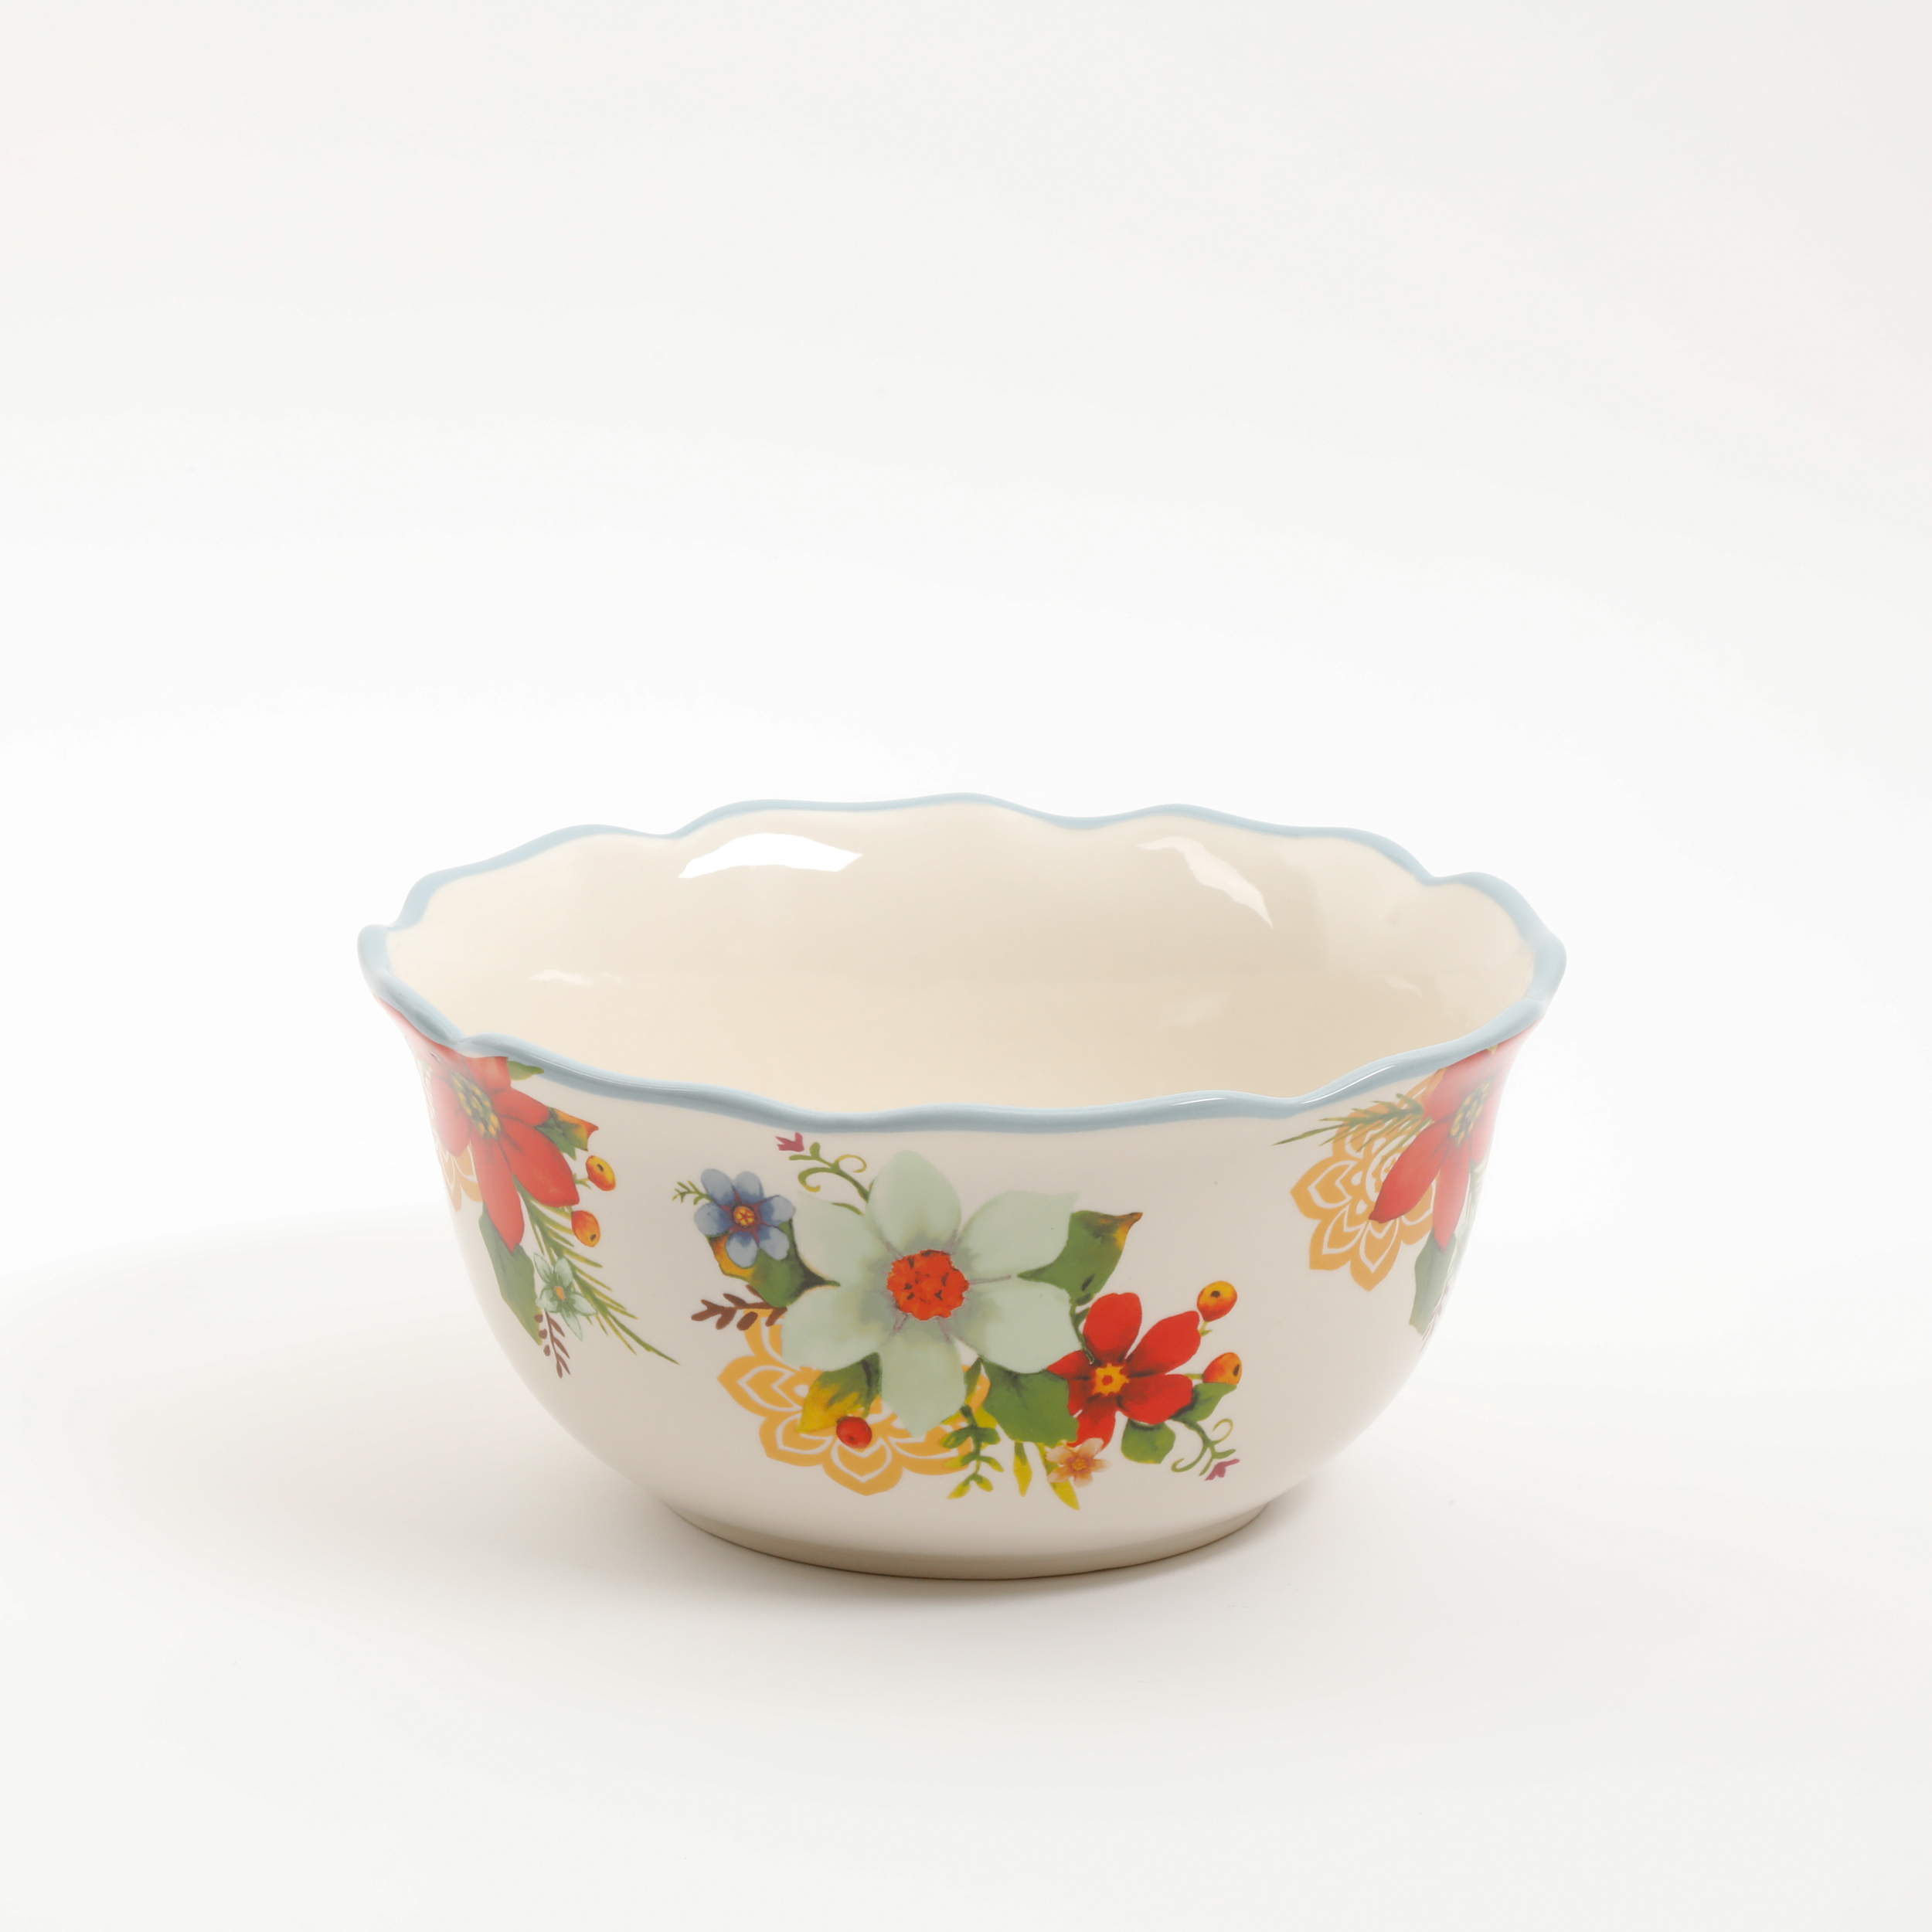 The Pioneer Woman Mint Bowl Set, 3 Piece - image 5 of 5